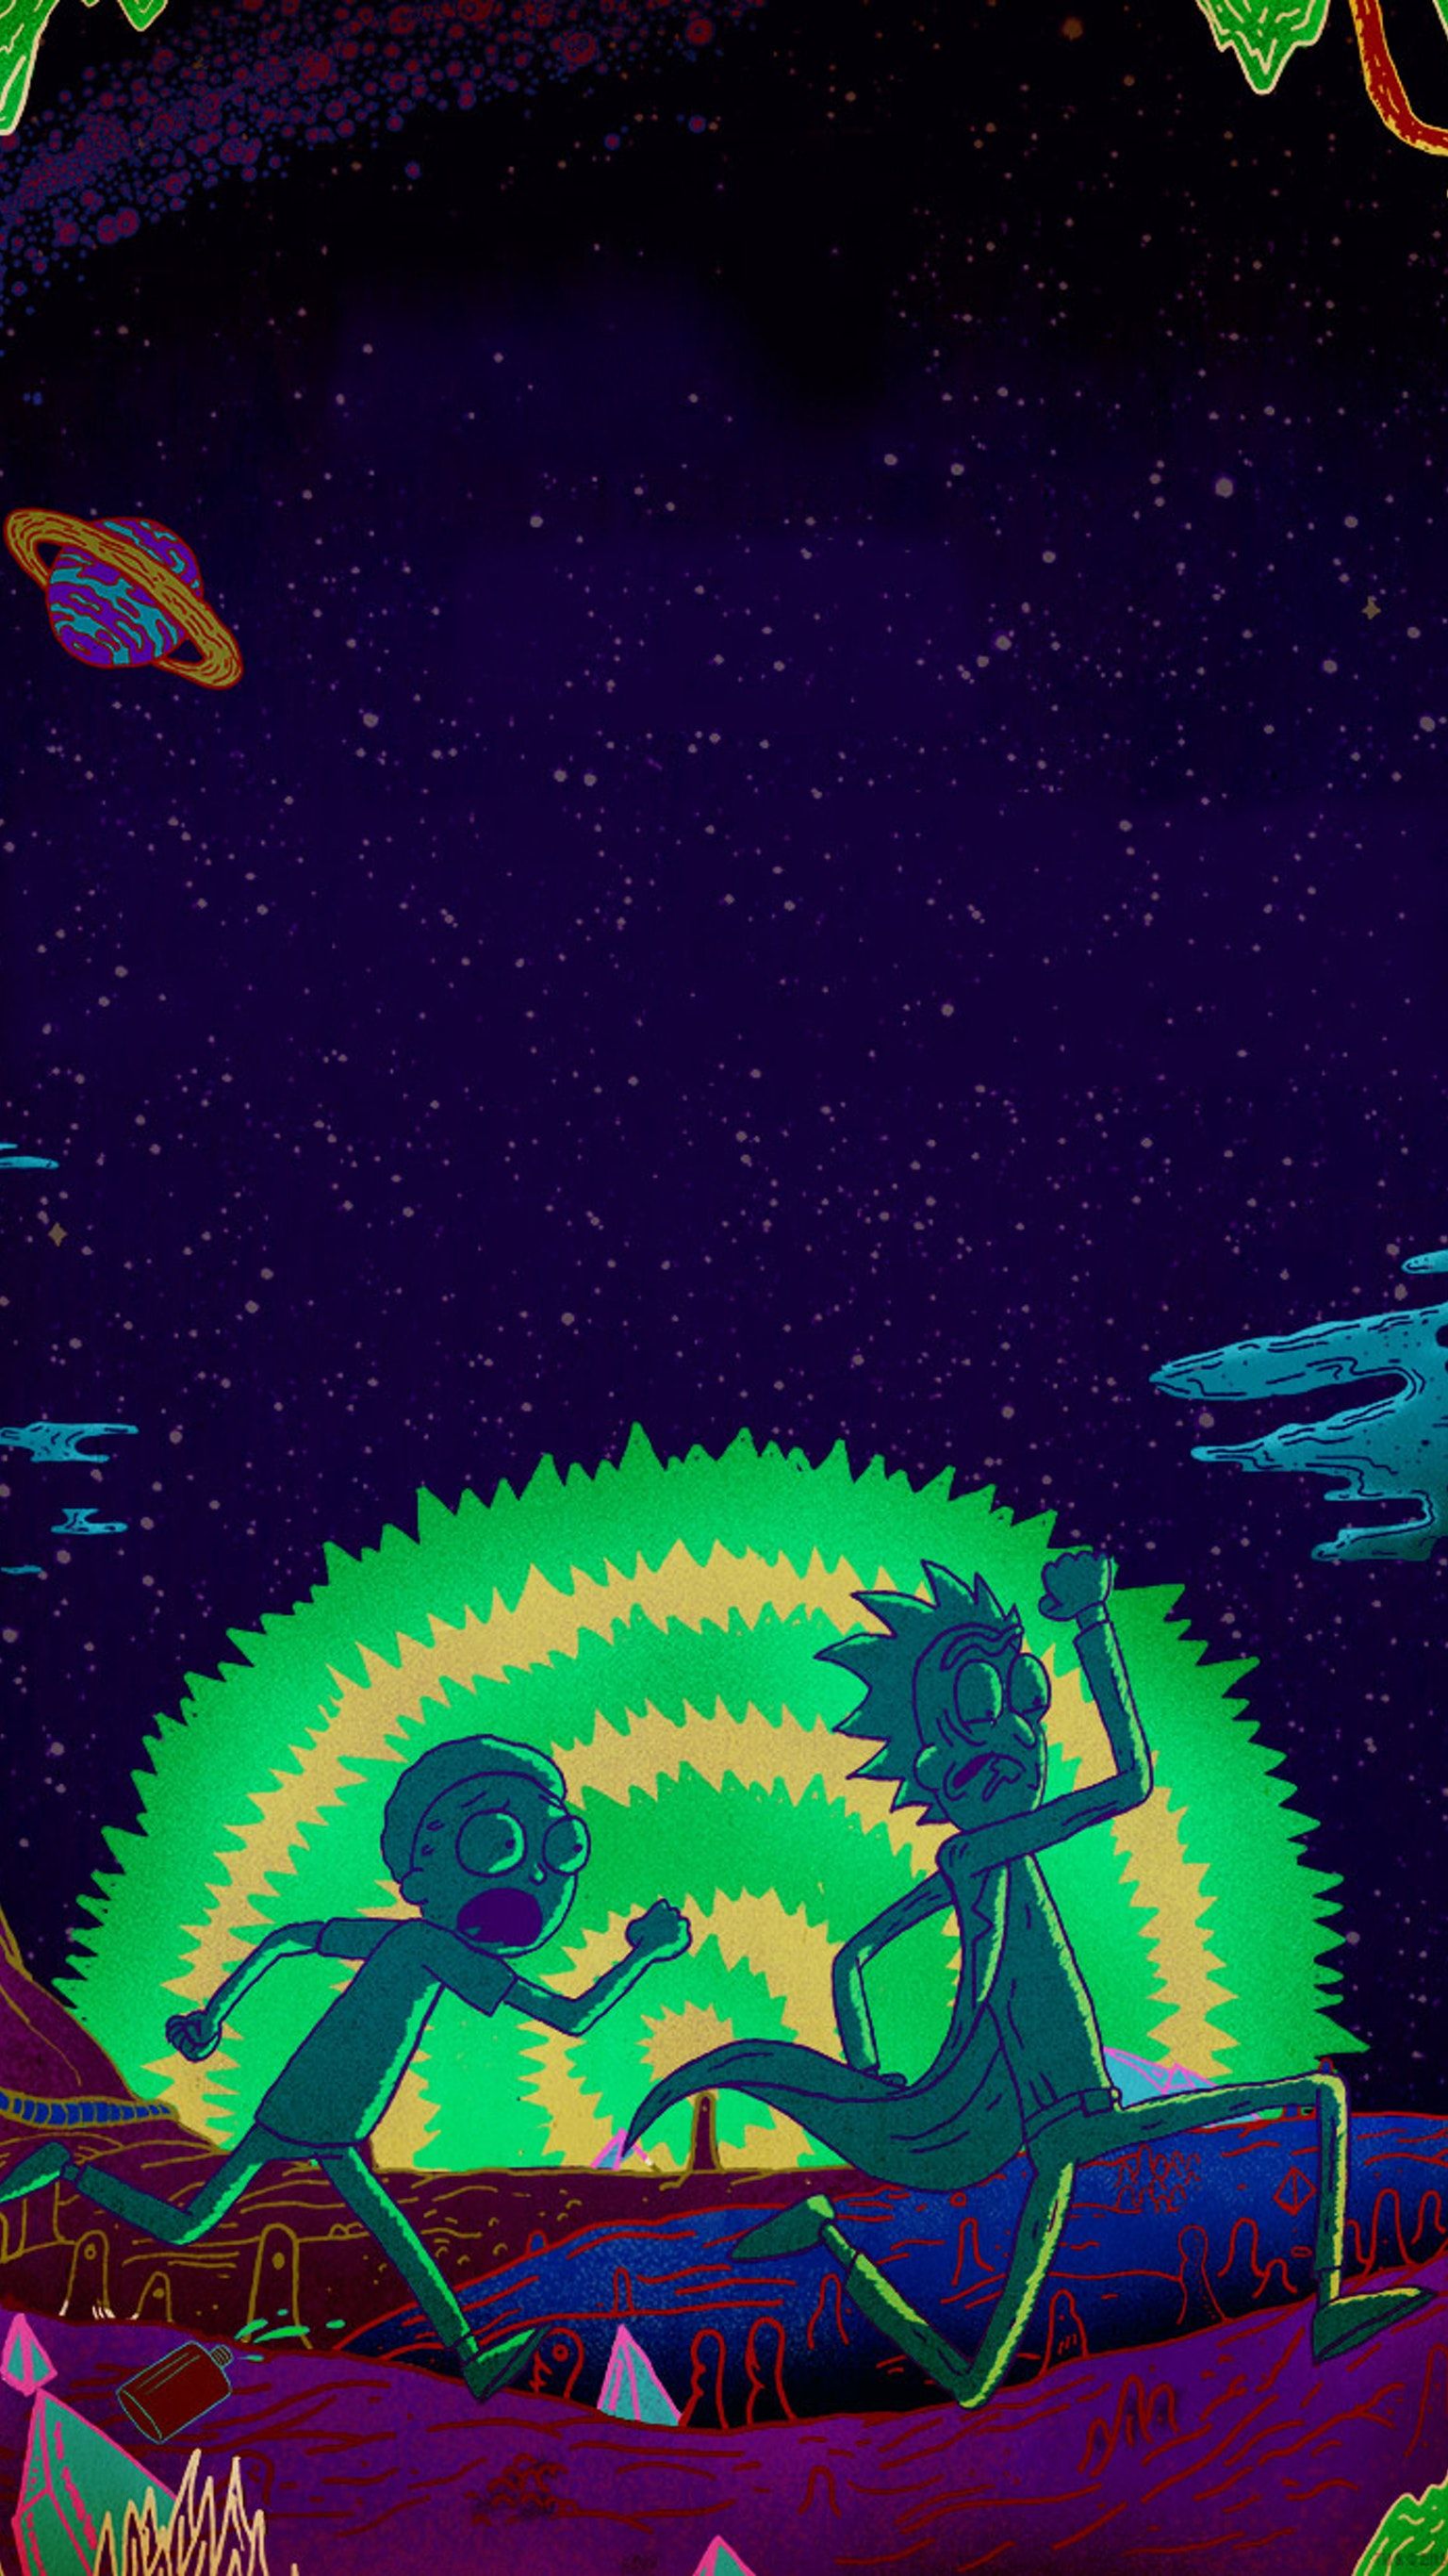 Rick And Morty Hd Mobile Wallpapers